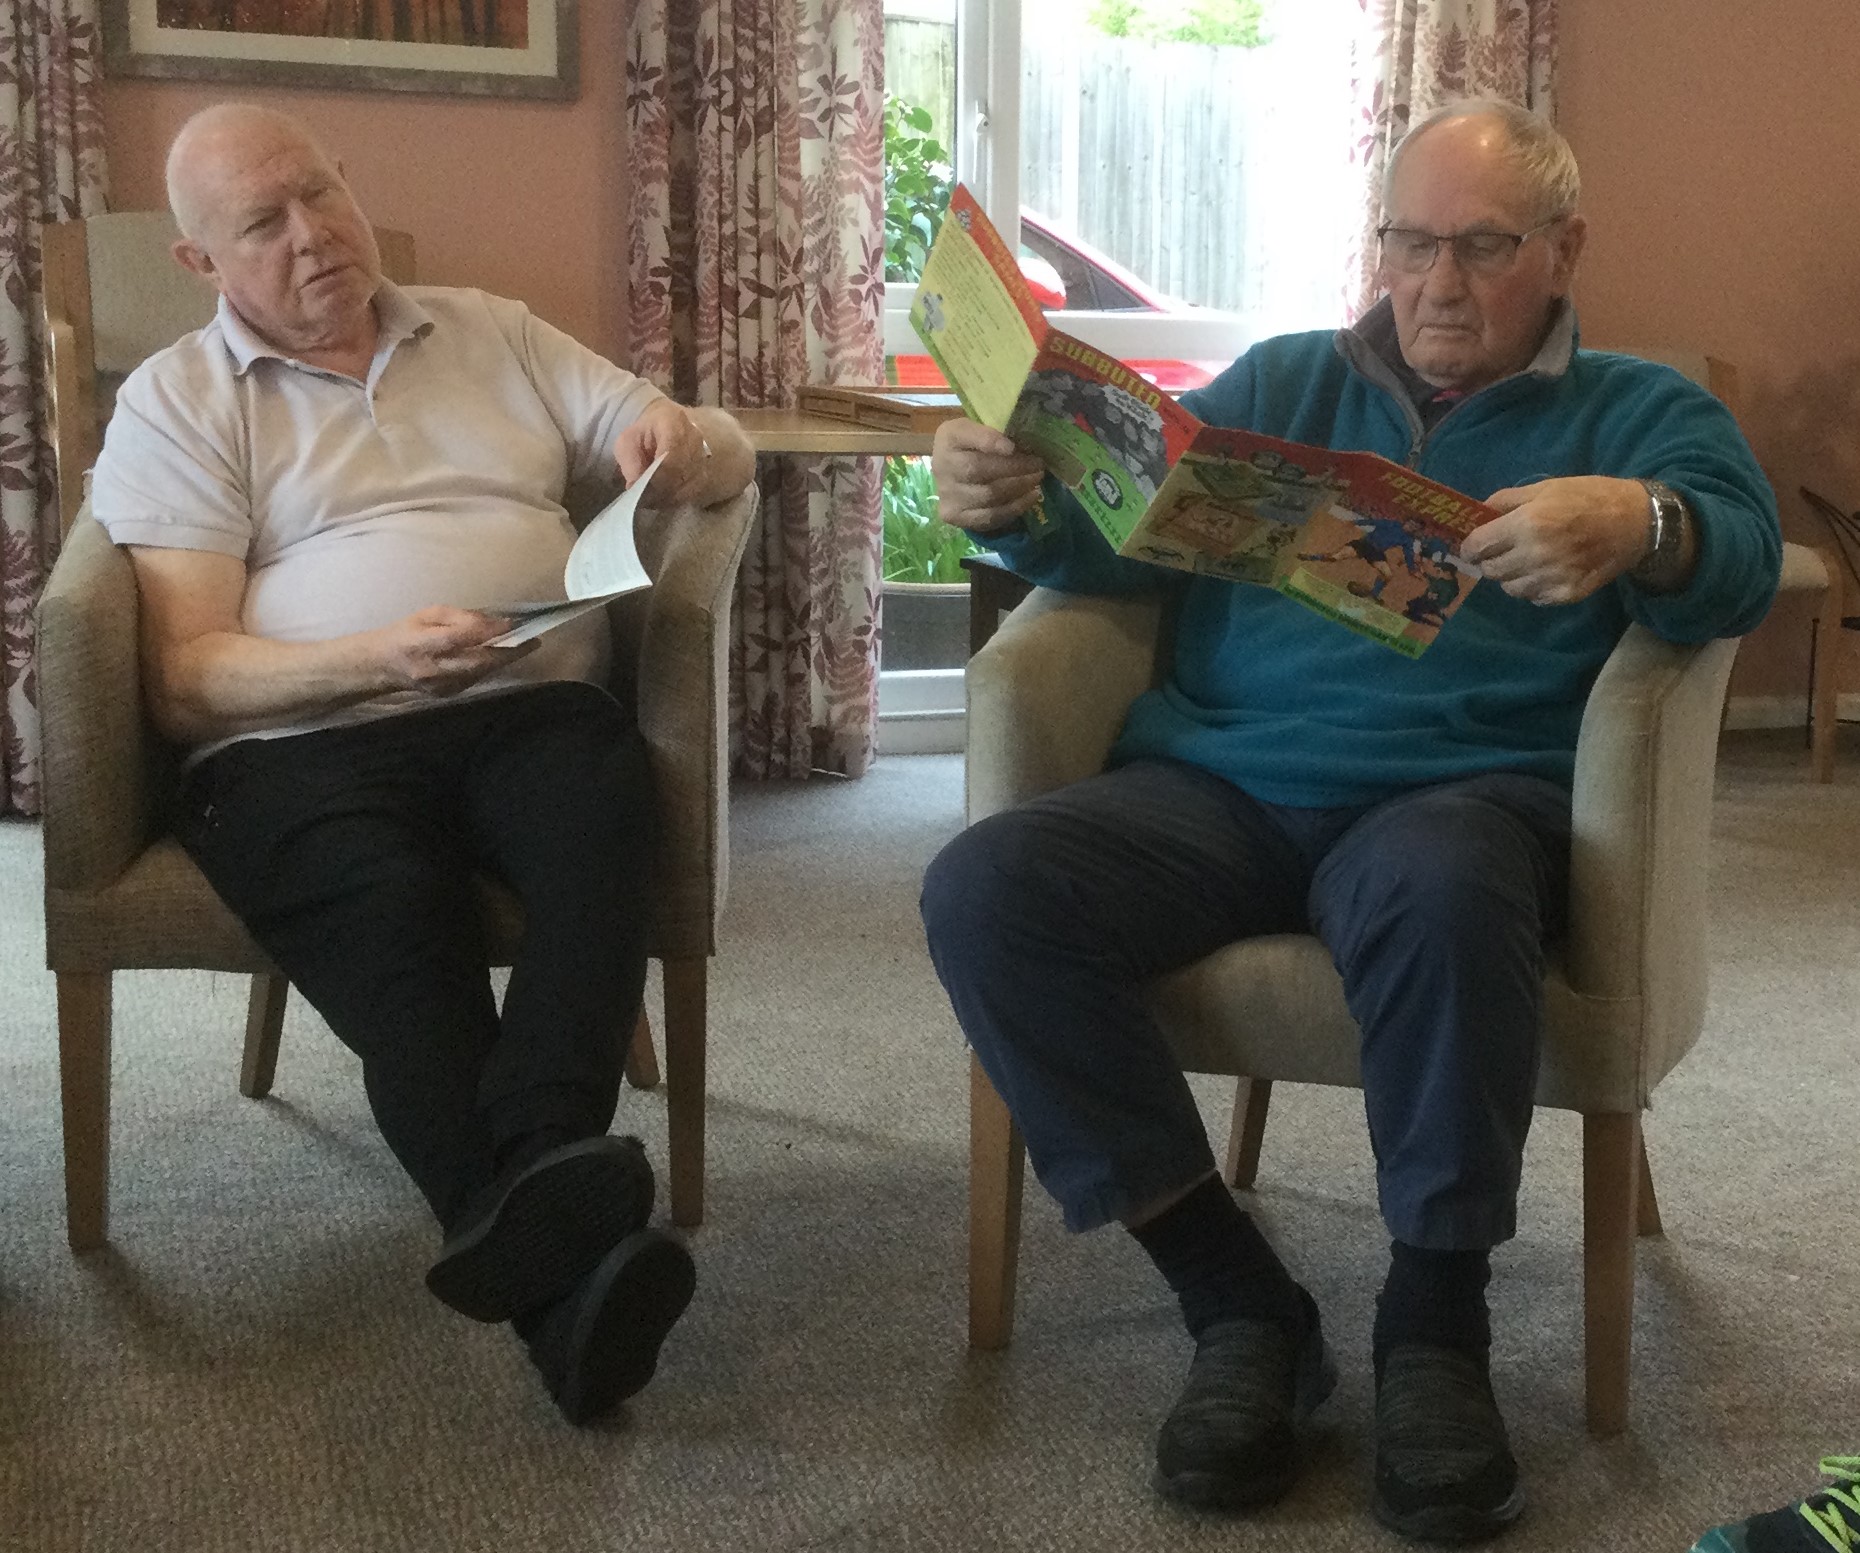 Two gentlemen seated in easy chairs reading football programmes